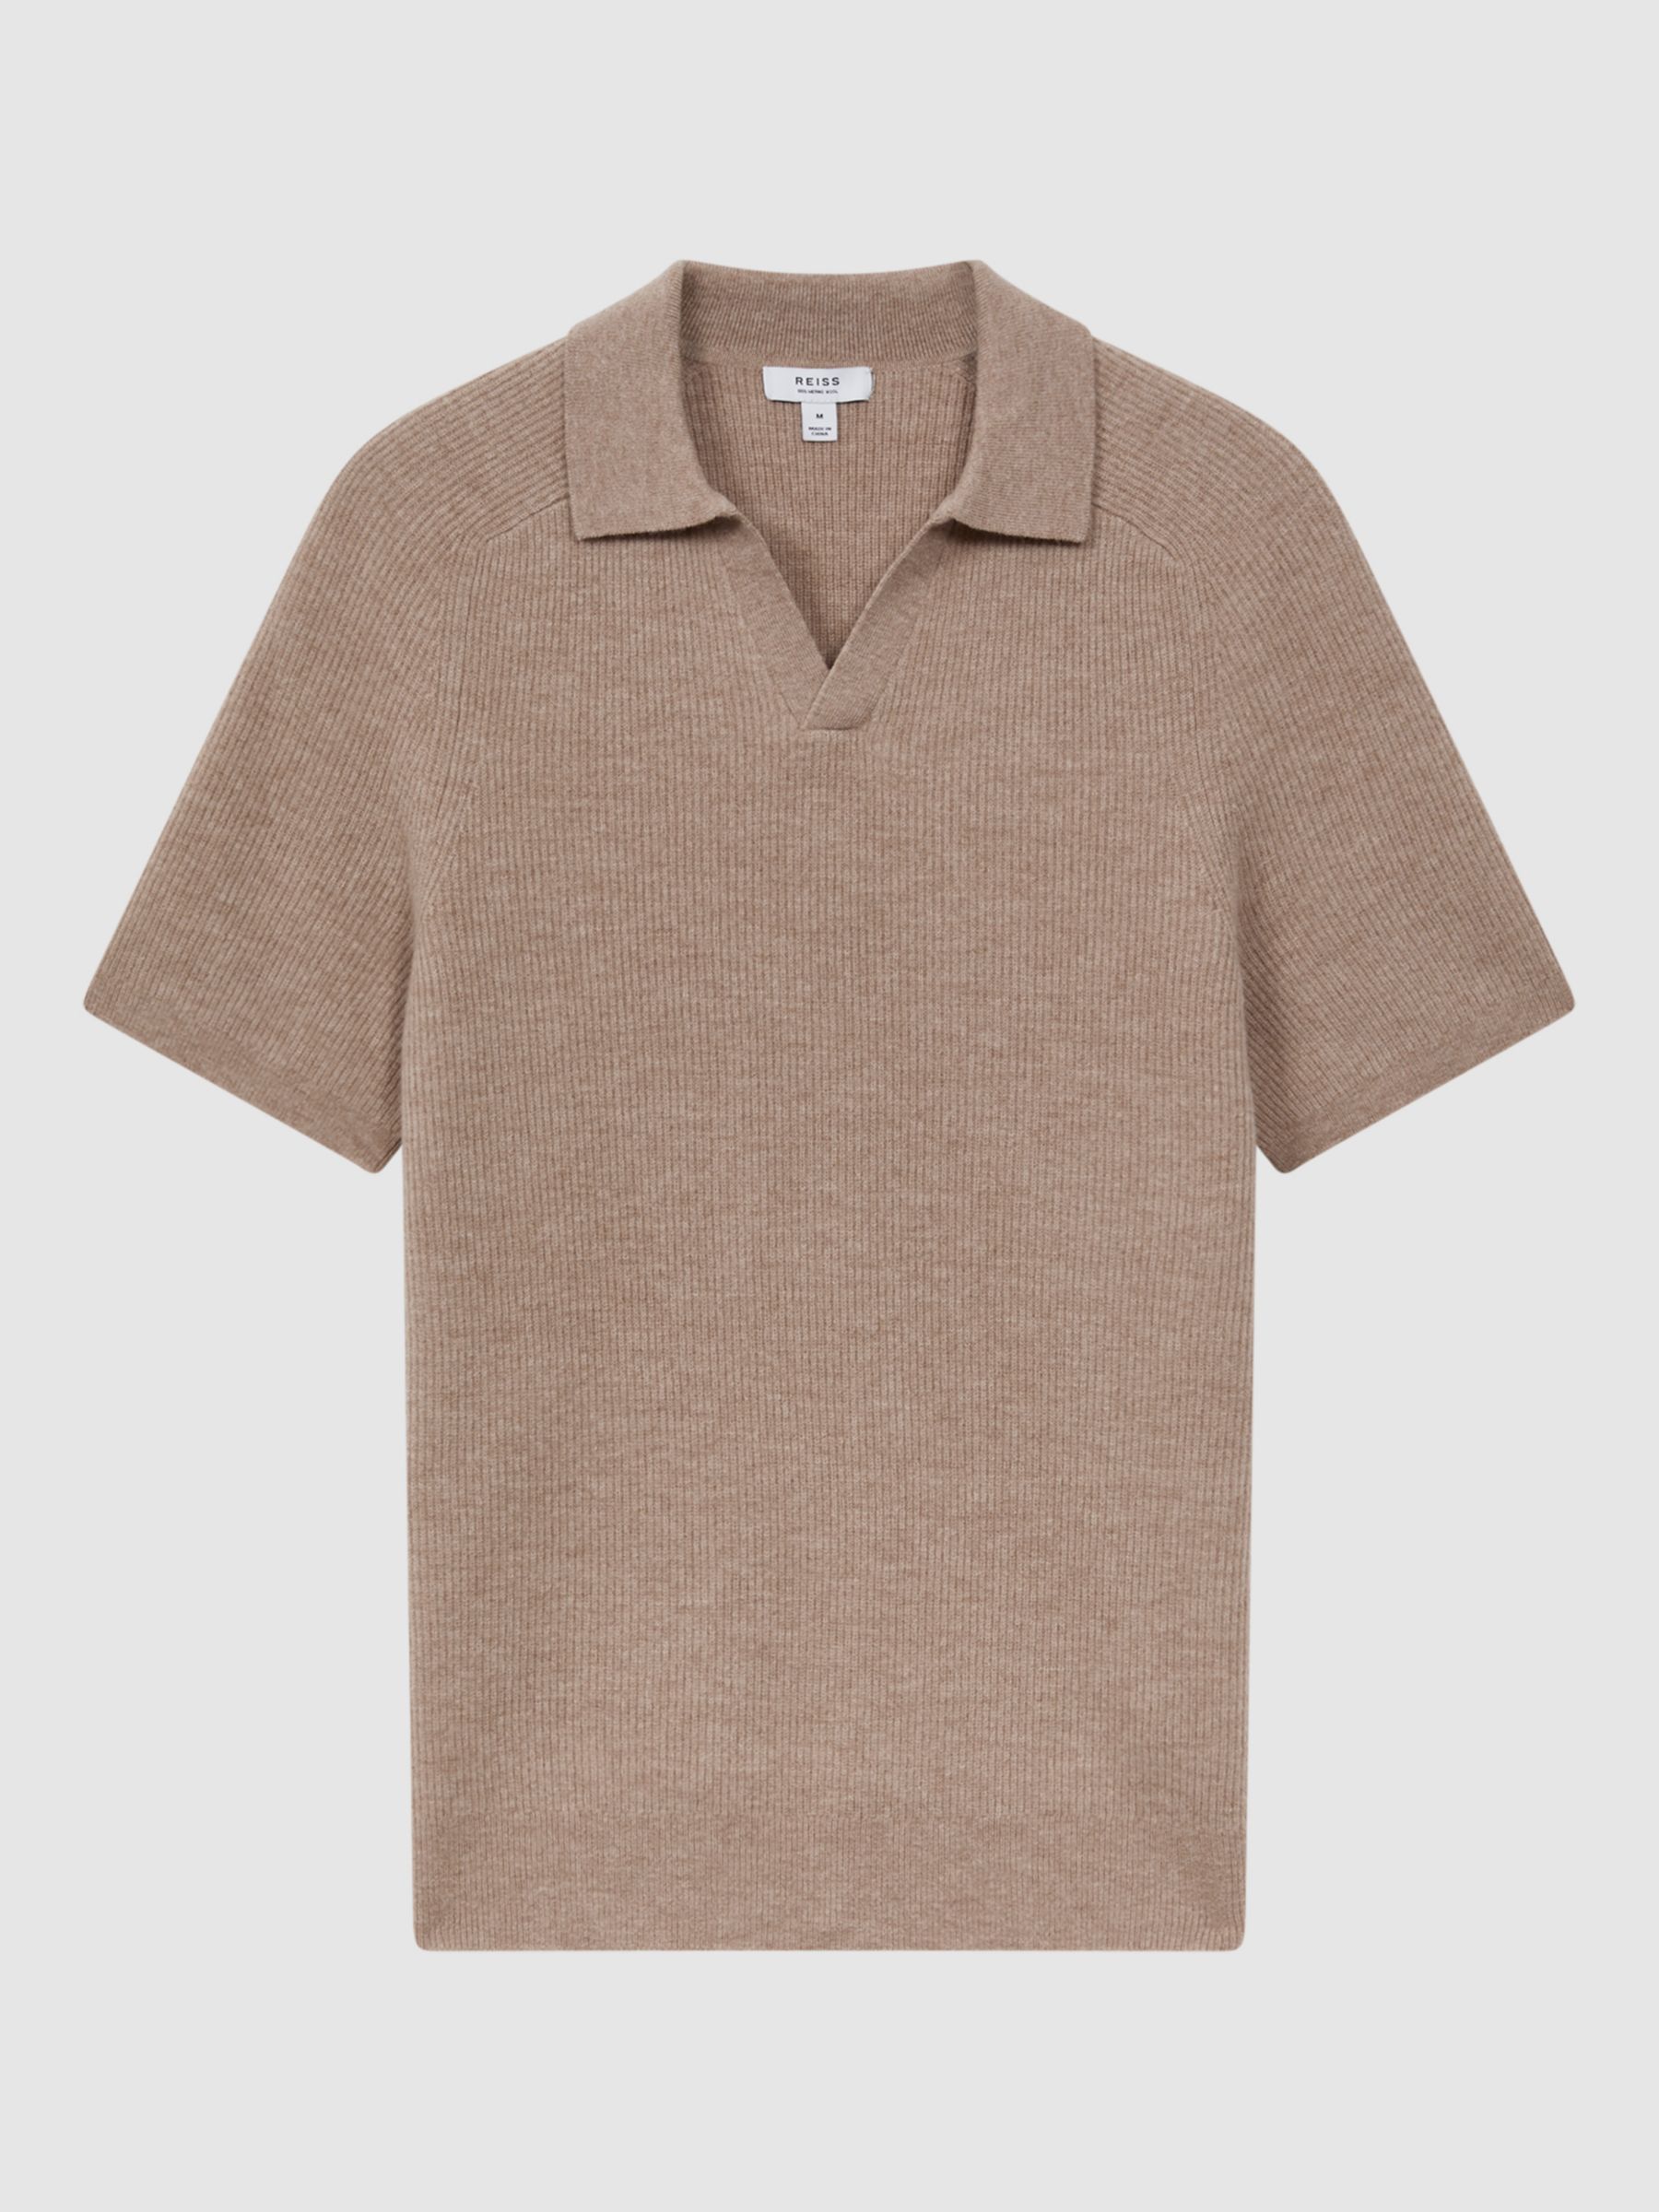 Reiss Mortimer Wool Open Neck Ribbed Polo, Camel, S